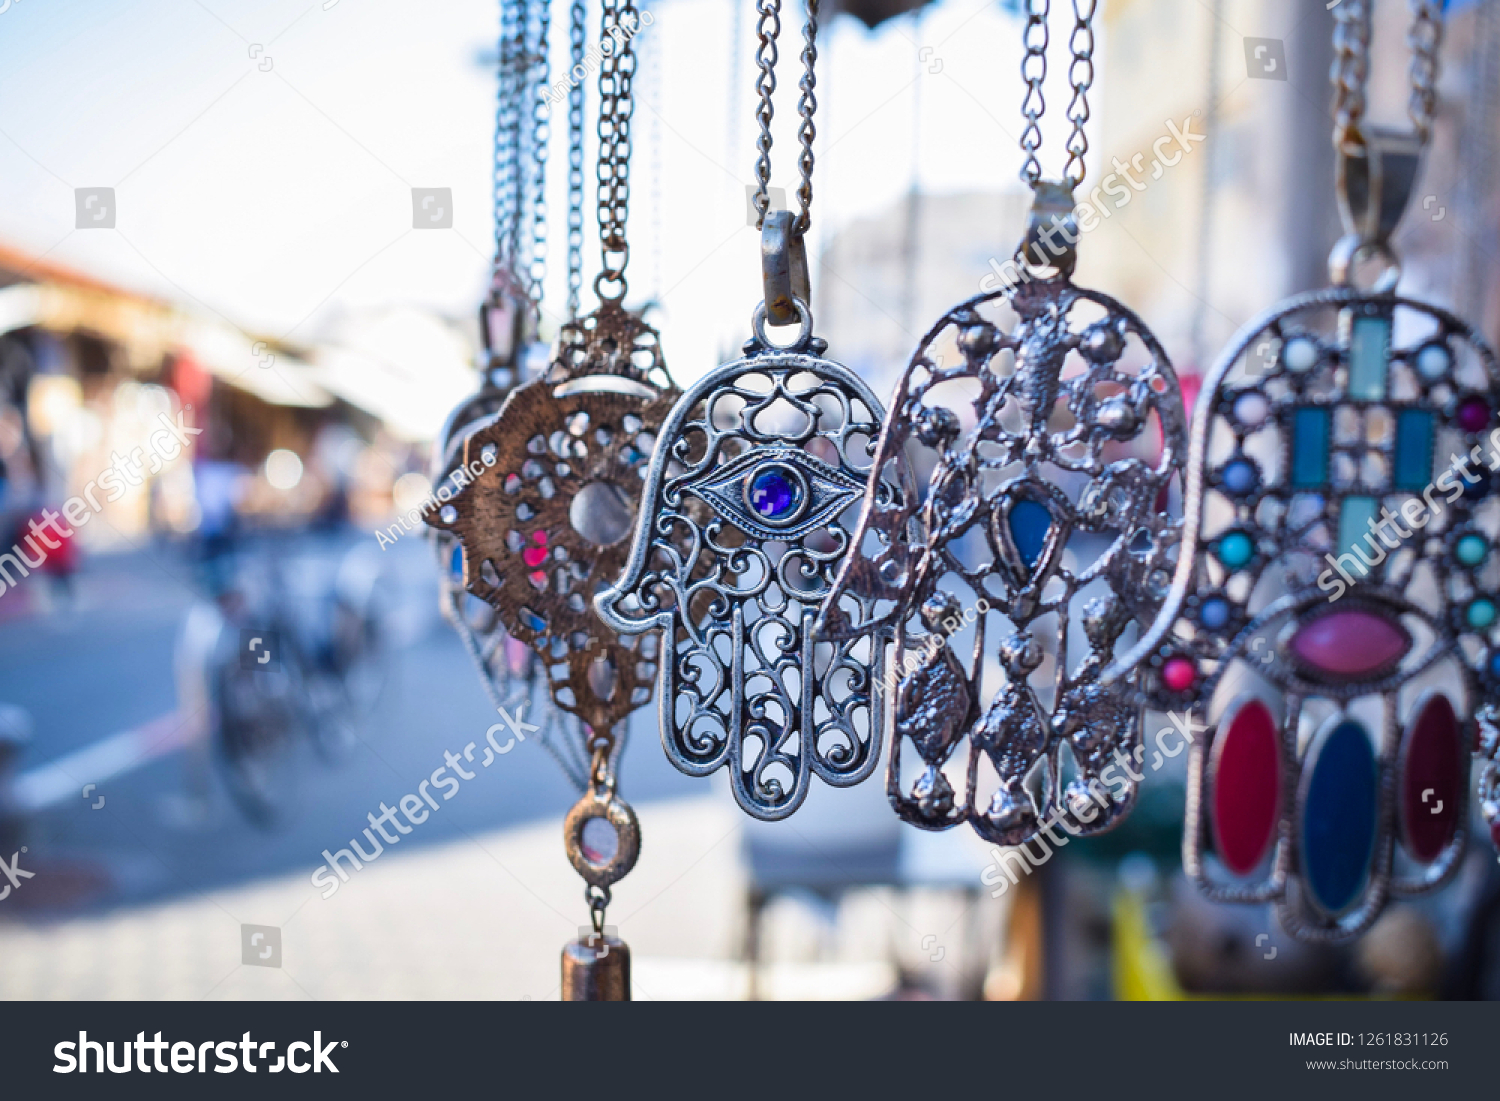 Close-up of Hamsa, also known as Fatima Hand or Hand of God necklace,  pending on a flea market in Tel Aviv-Jaffa, Israel. Metal protection amulet. #1261831126